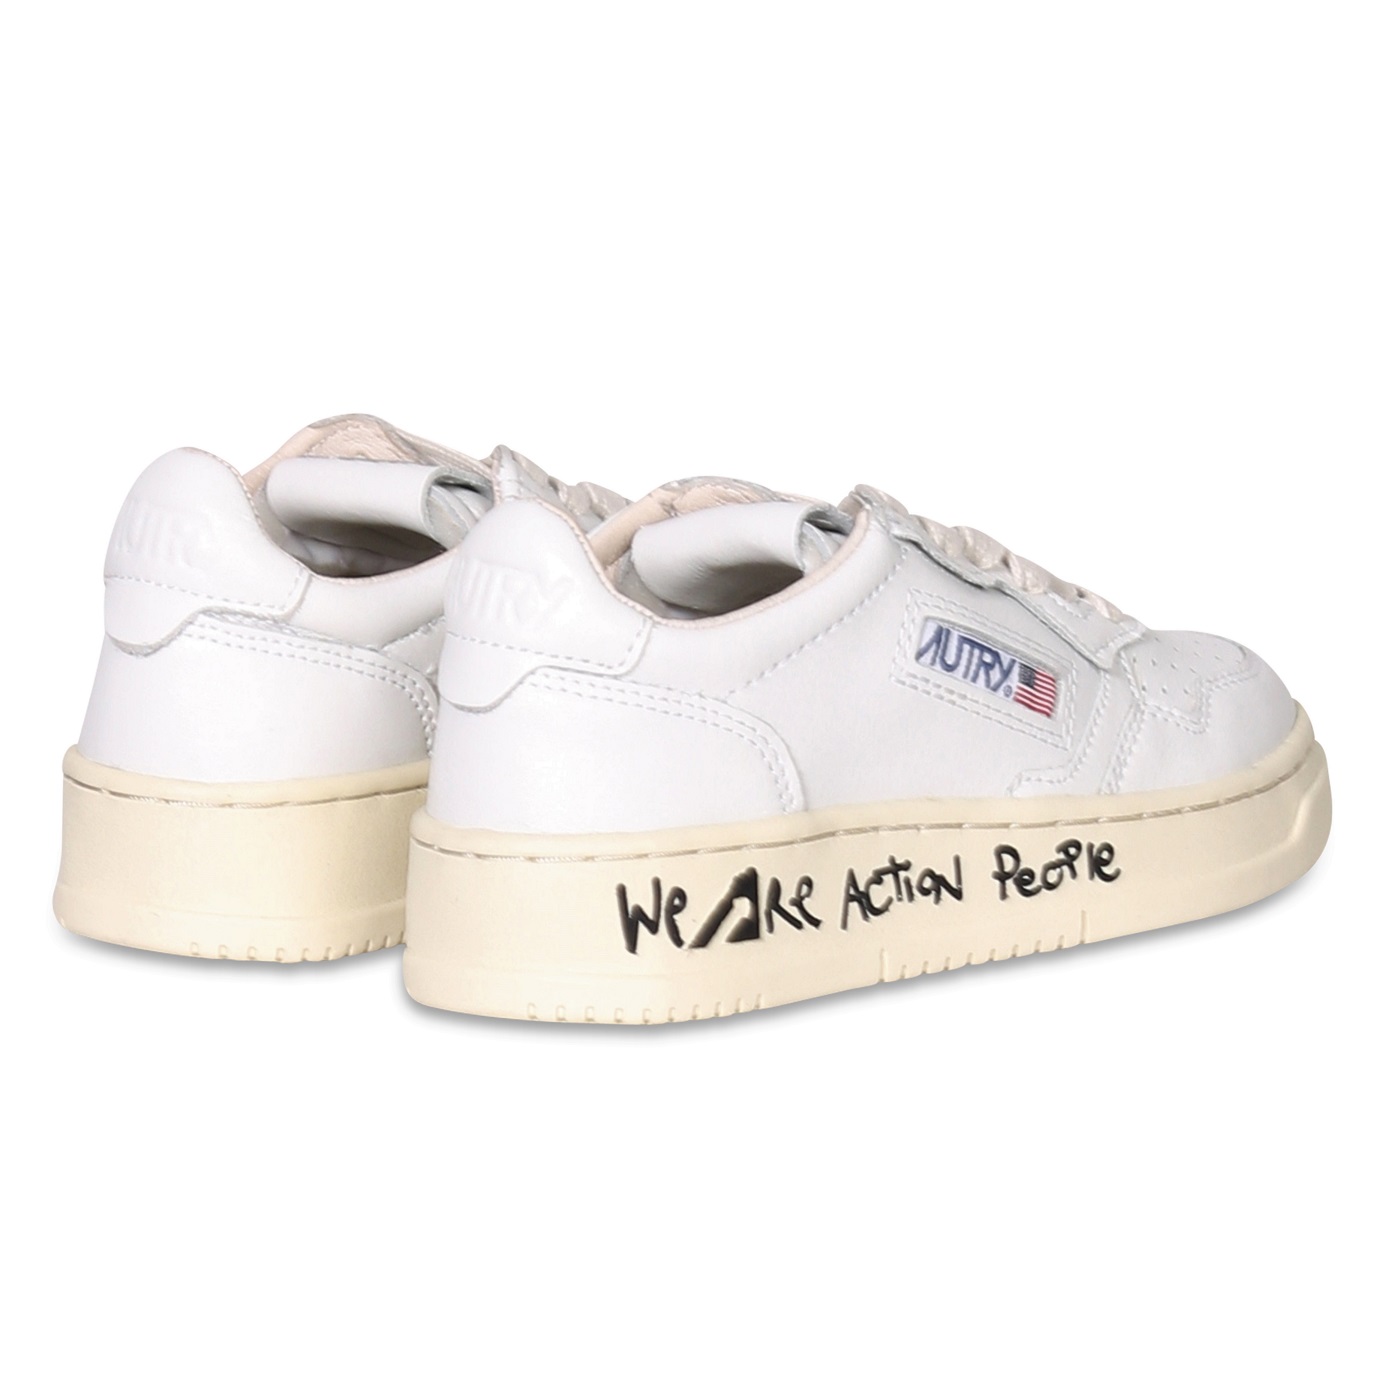 -KIDS- AUTRY ACTION SHOES Low Sneaker in White Draw Action People 26